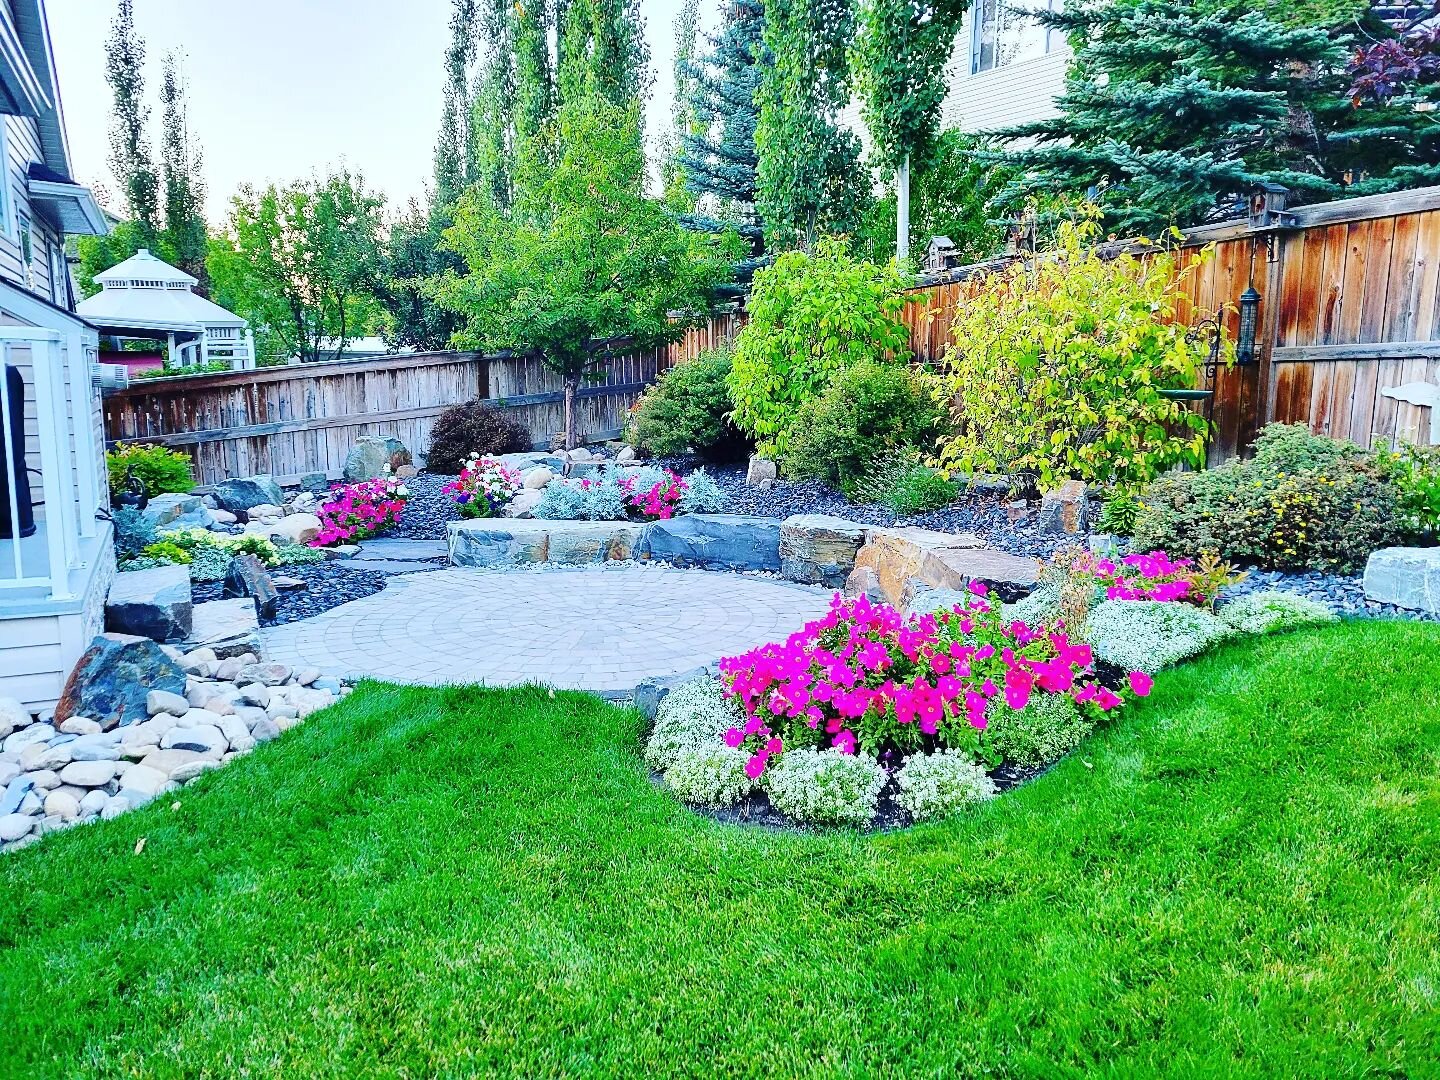 A project we completed last year is maturing beautifully!

Call us for a free estimate today

4034717588

#yournaturalstonespecialists #landscaping #yyclandscaping #backyard #calgarylandscaping #work #outside #yycliving #yycluxury #calgaryluxuryhomes